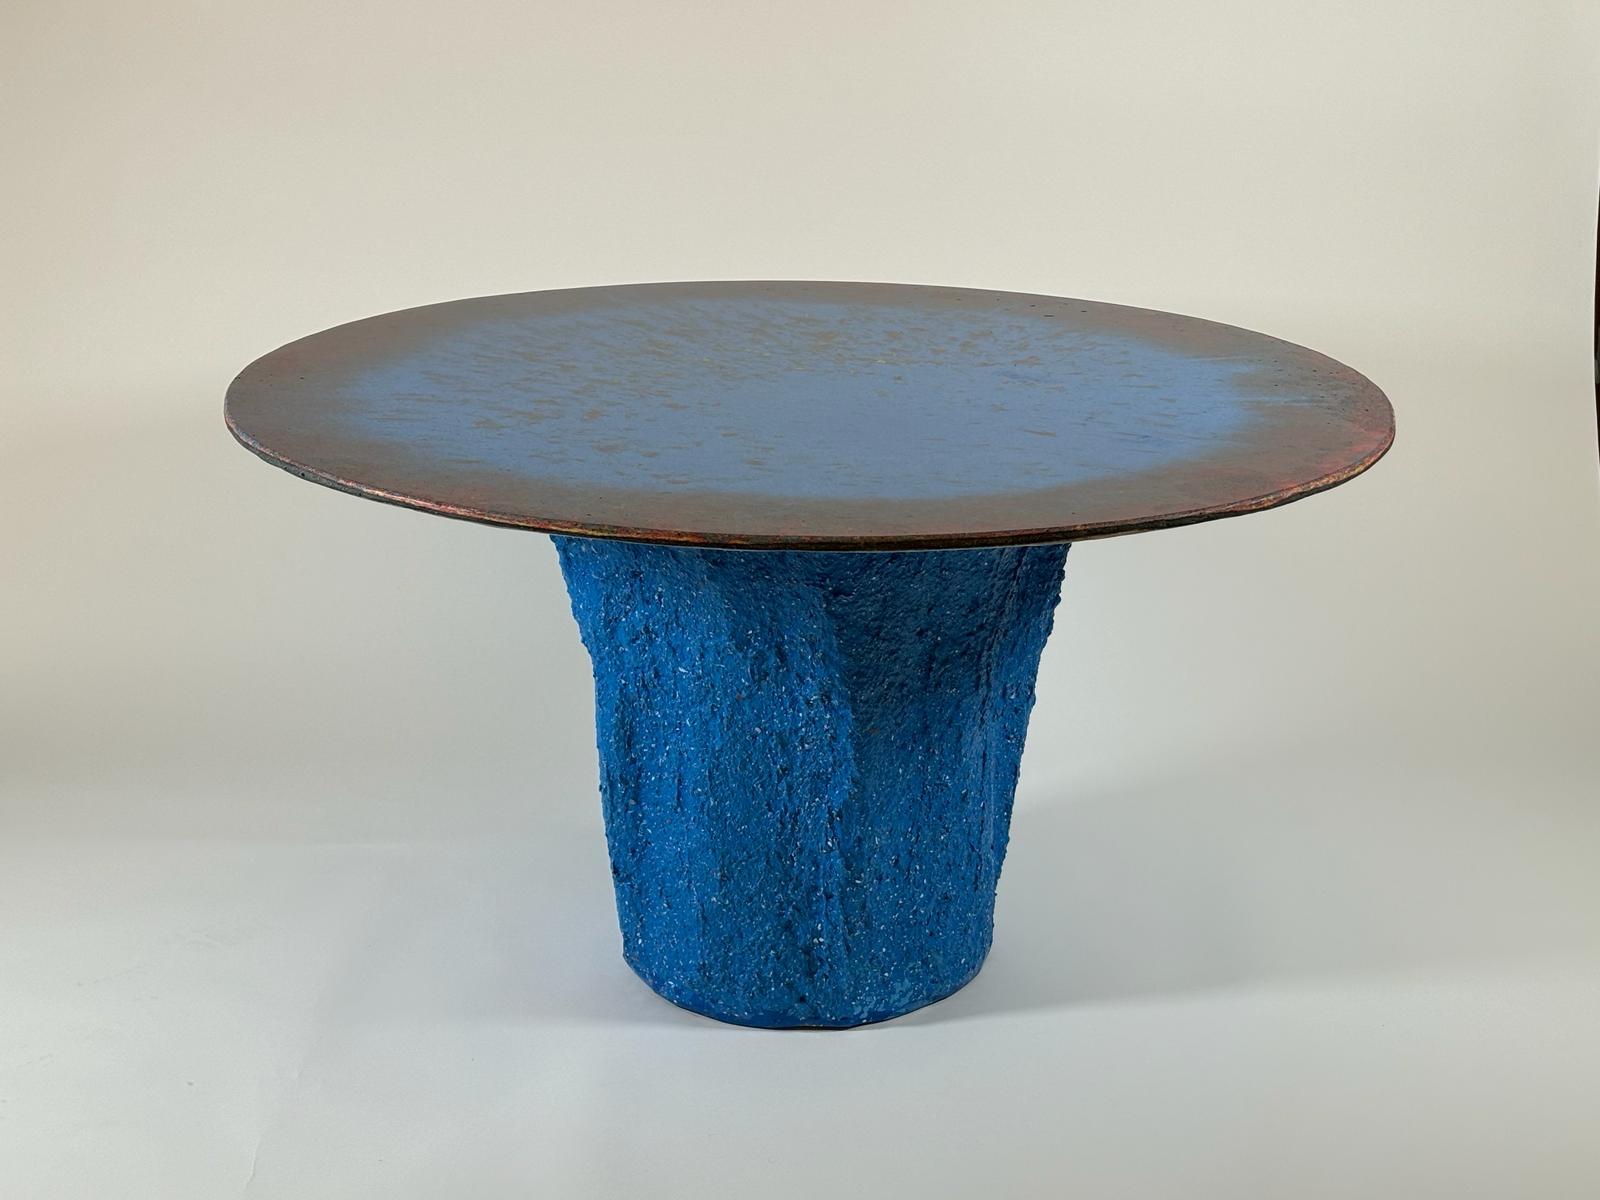 Table from the Kernel series is a unique piece made entirely by hand by the designer. Completely built in Glebanite, a special blend of recycled and recyclable fiberglass. An artistic work of circular economy that takes care of the planet earth and